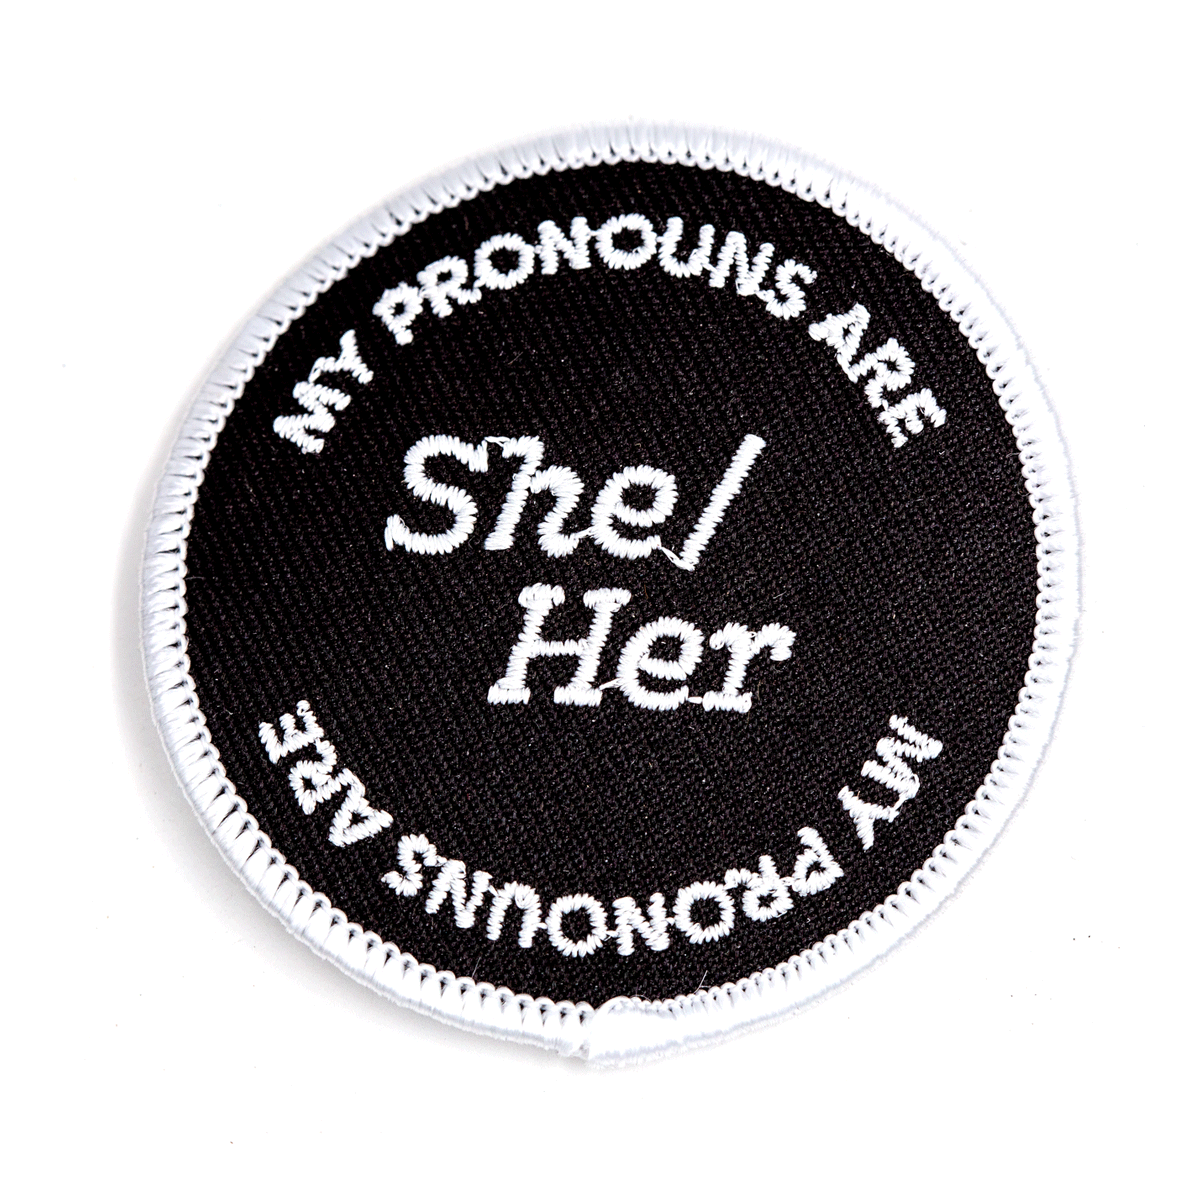 She/Her Pronouns Embroidered Iron-On Patch